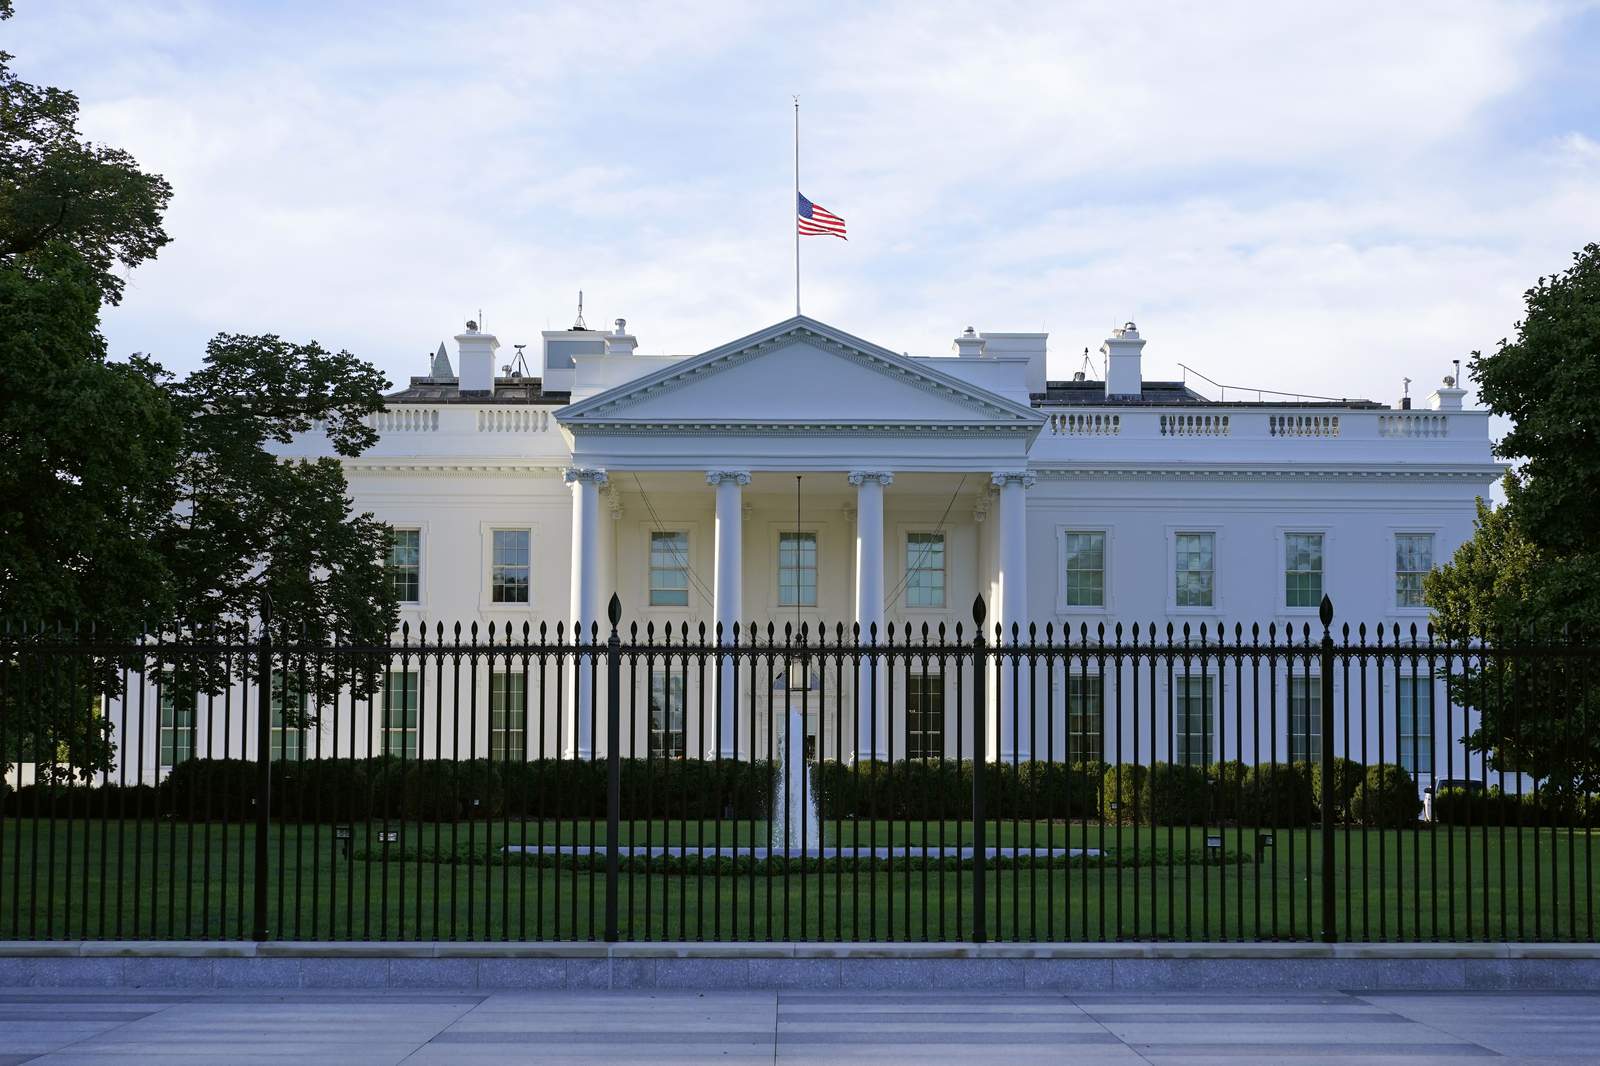 AP source: Envelope addressed to White House contained poison